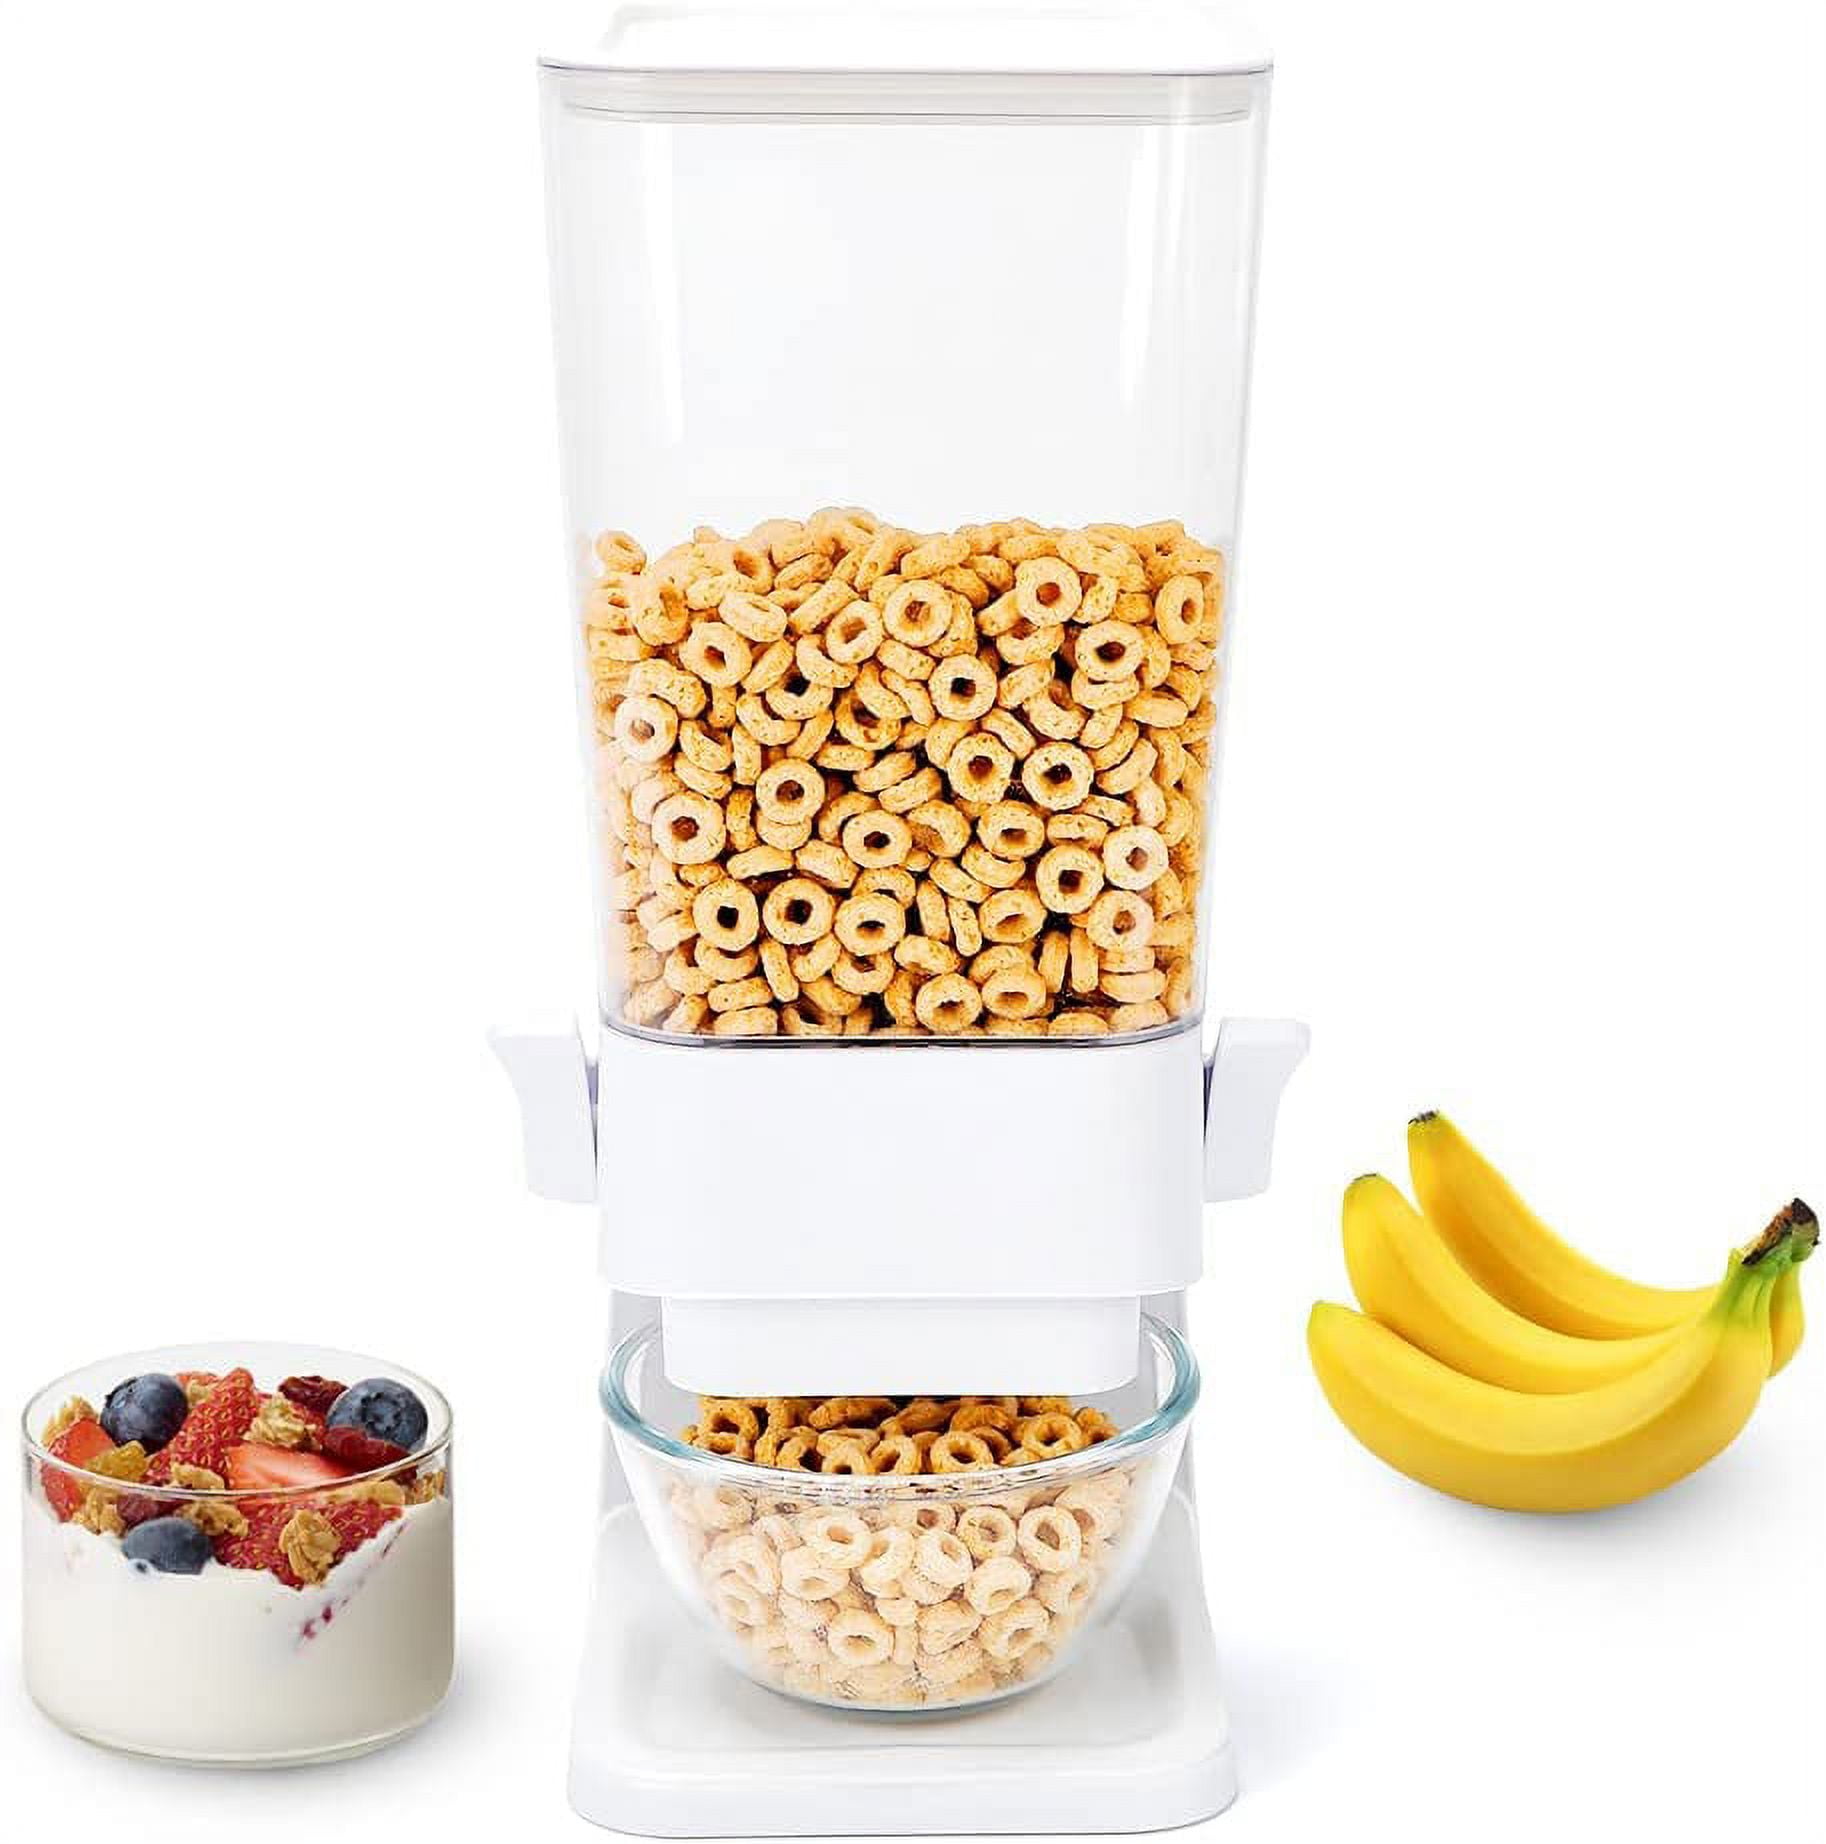 2Pc Cereal Dispenser Countertop,𝑪𝒂𝒏𝒅𝒚 𝑫𝒊𝒔𝒑𝒆𝒏𝒔𝒆𝒓,5.5L Large  Cereal Containers Storage Dispenser for Pantry